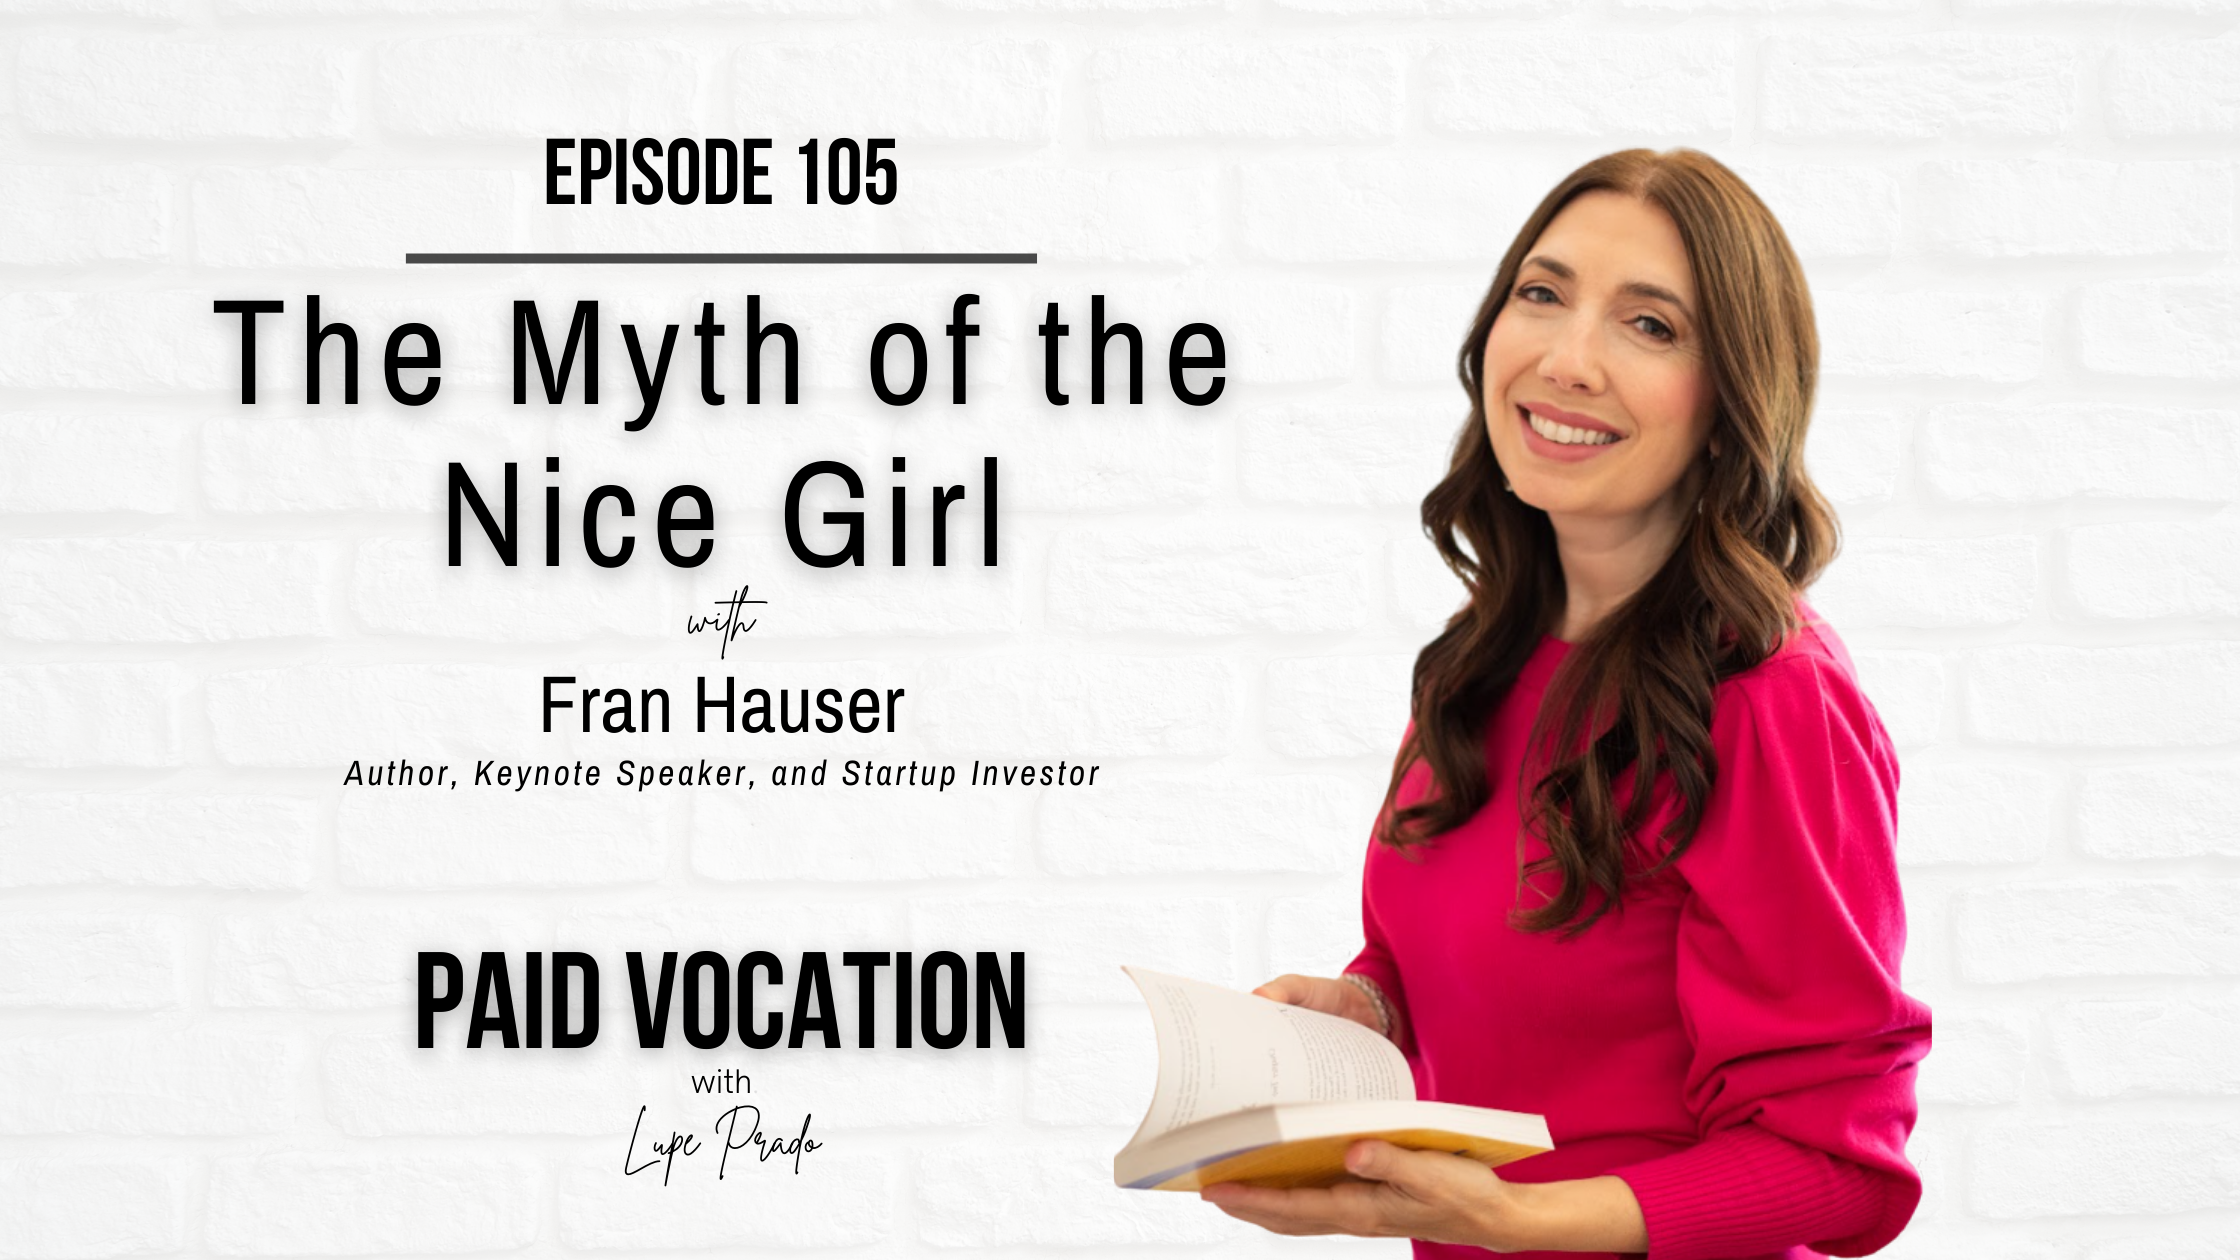 The Myth of the Nice Girl with Fran Hauser